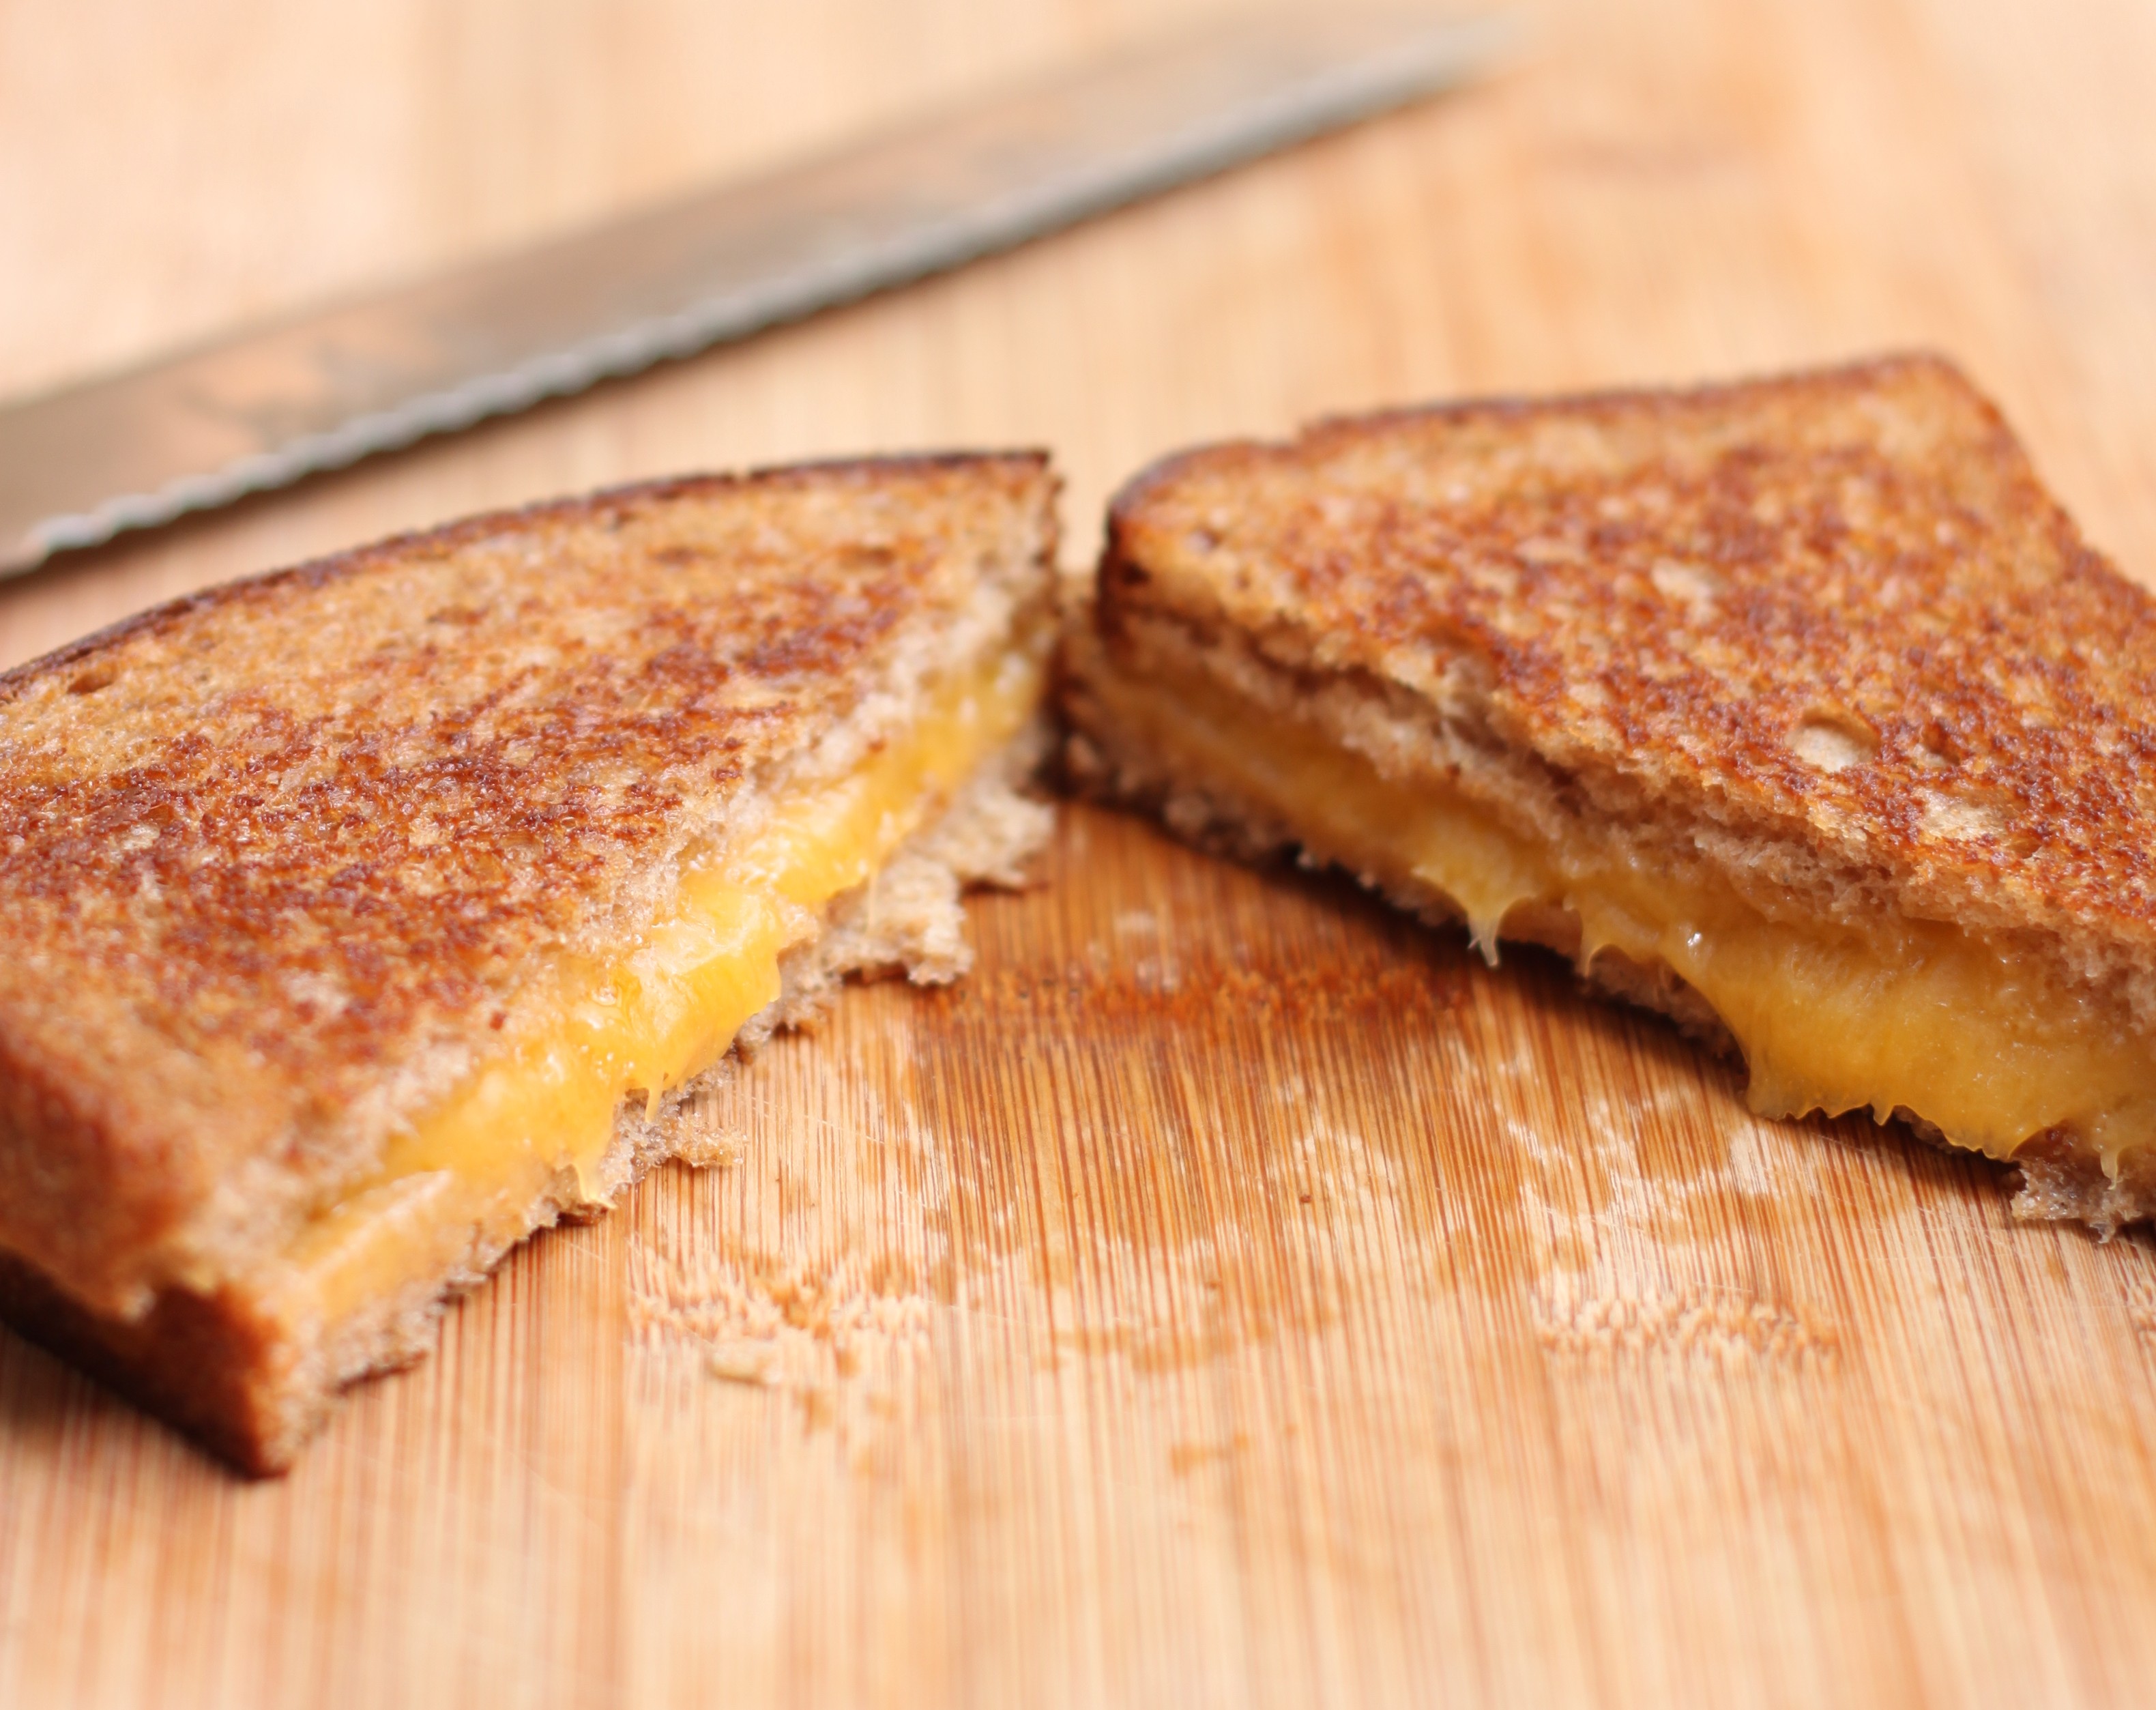 Eat brown butter grilled cheese immediately